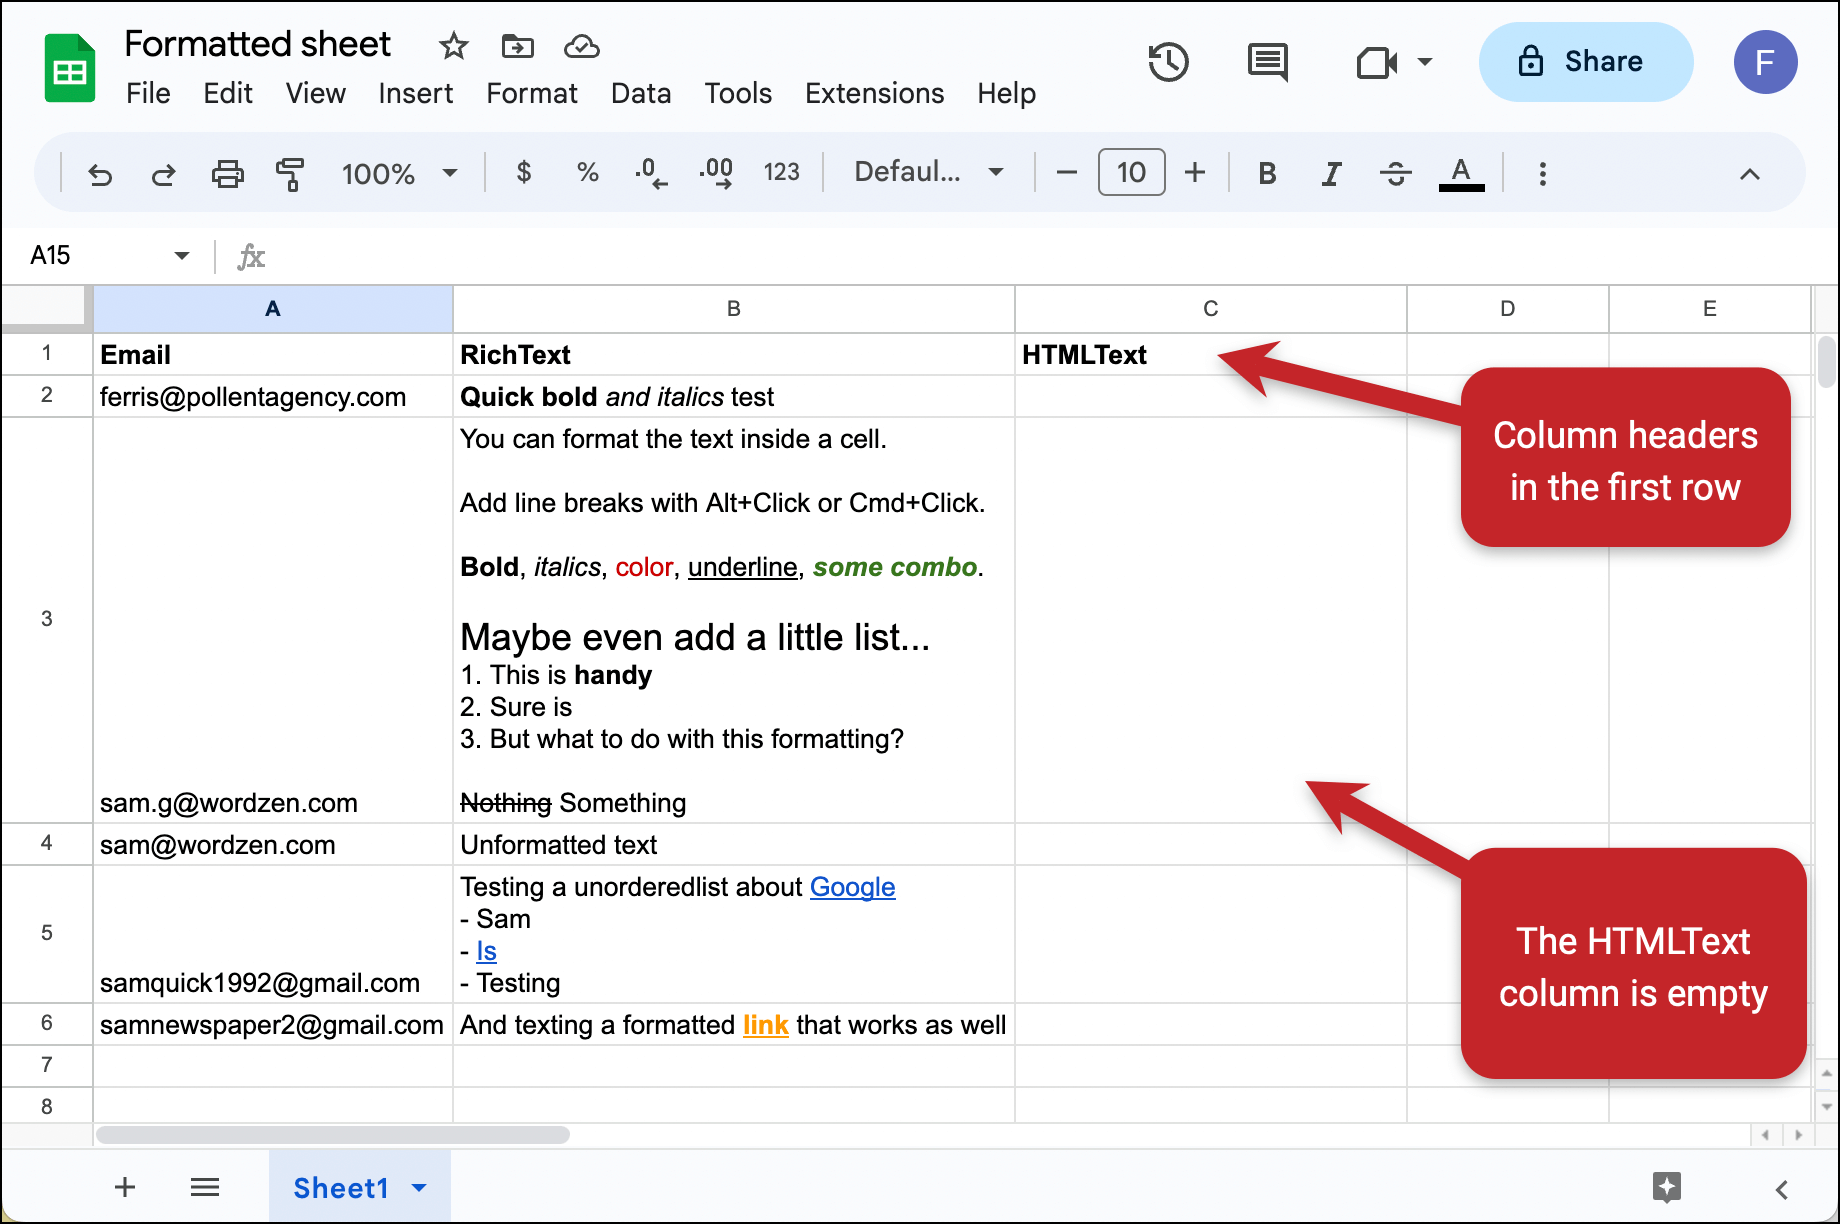 Create two columns in your Google Sheet for the text